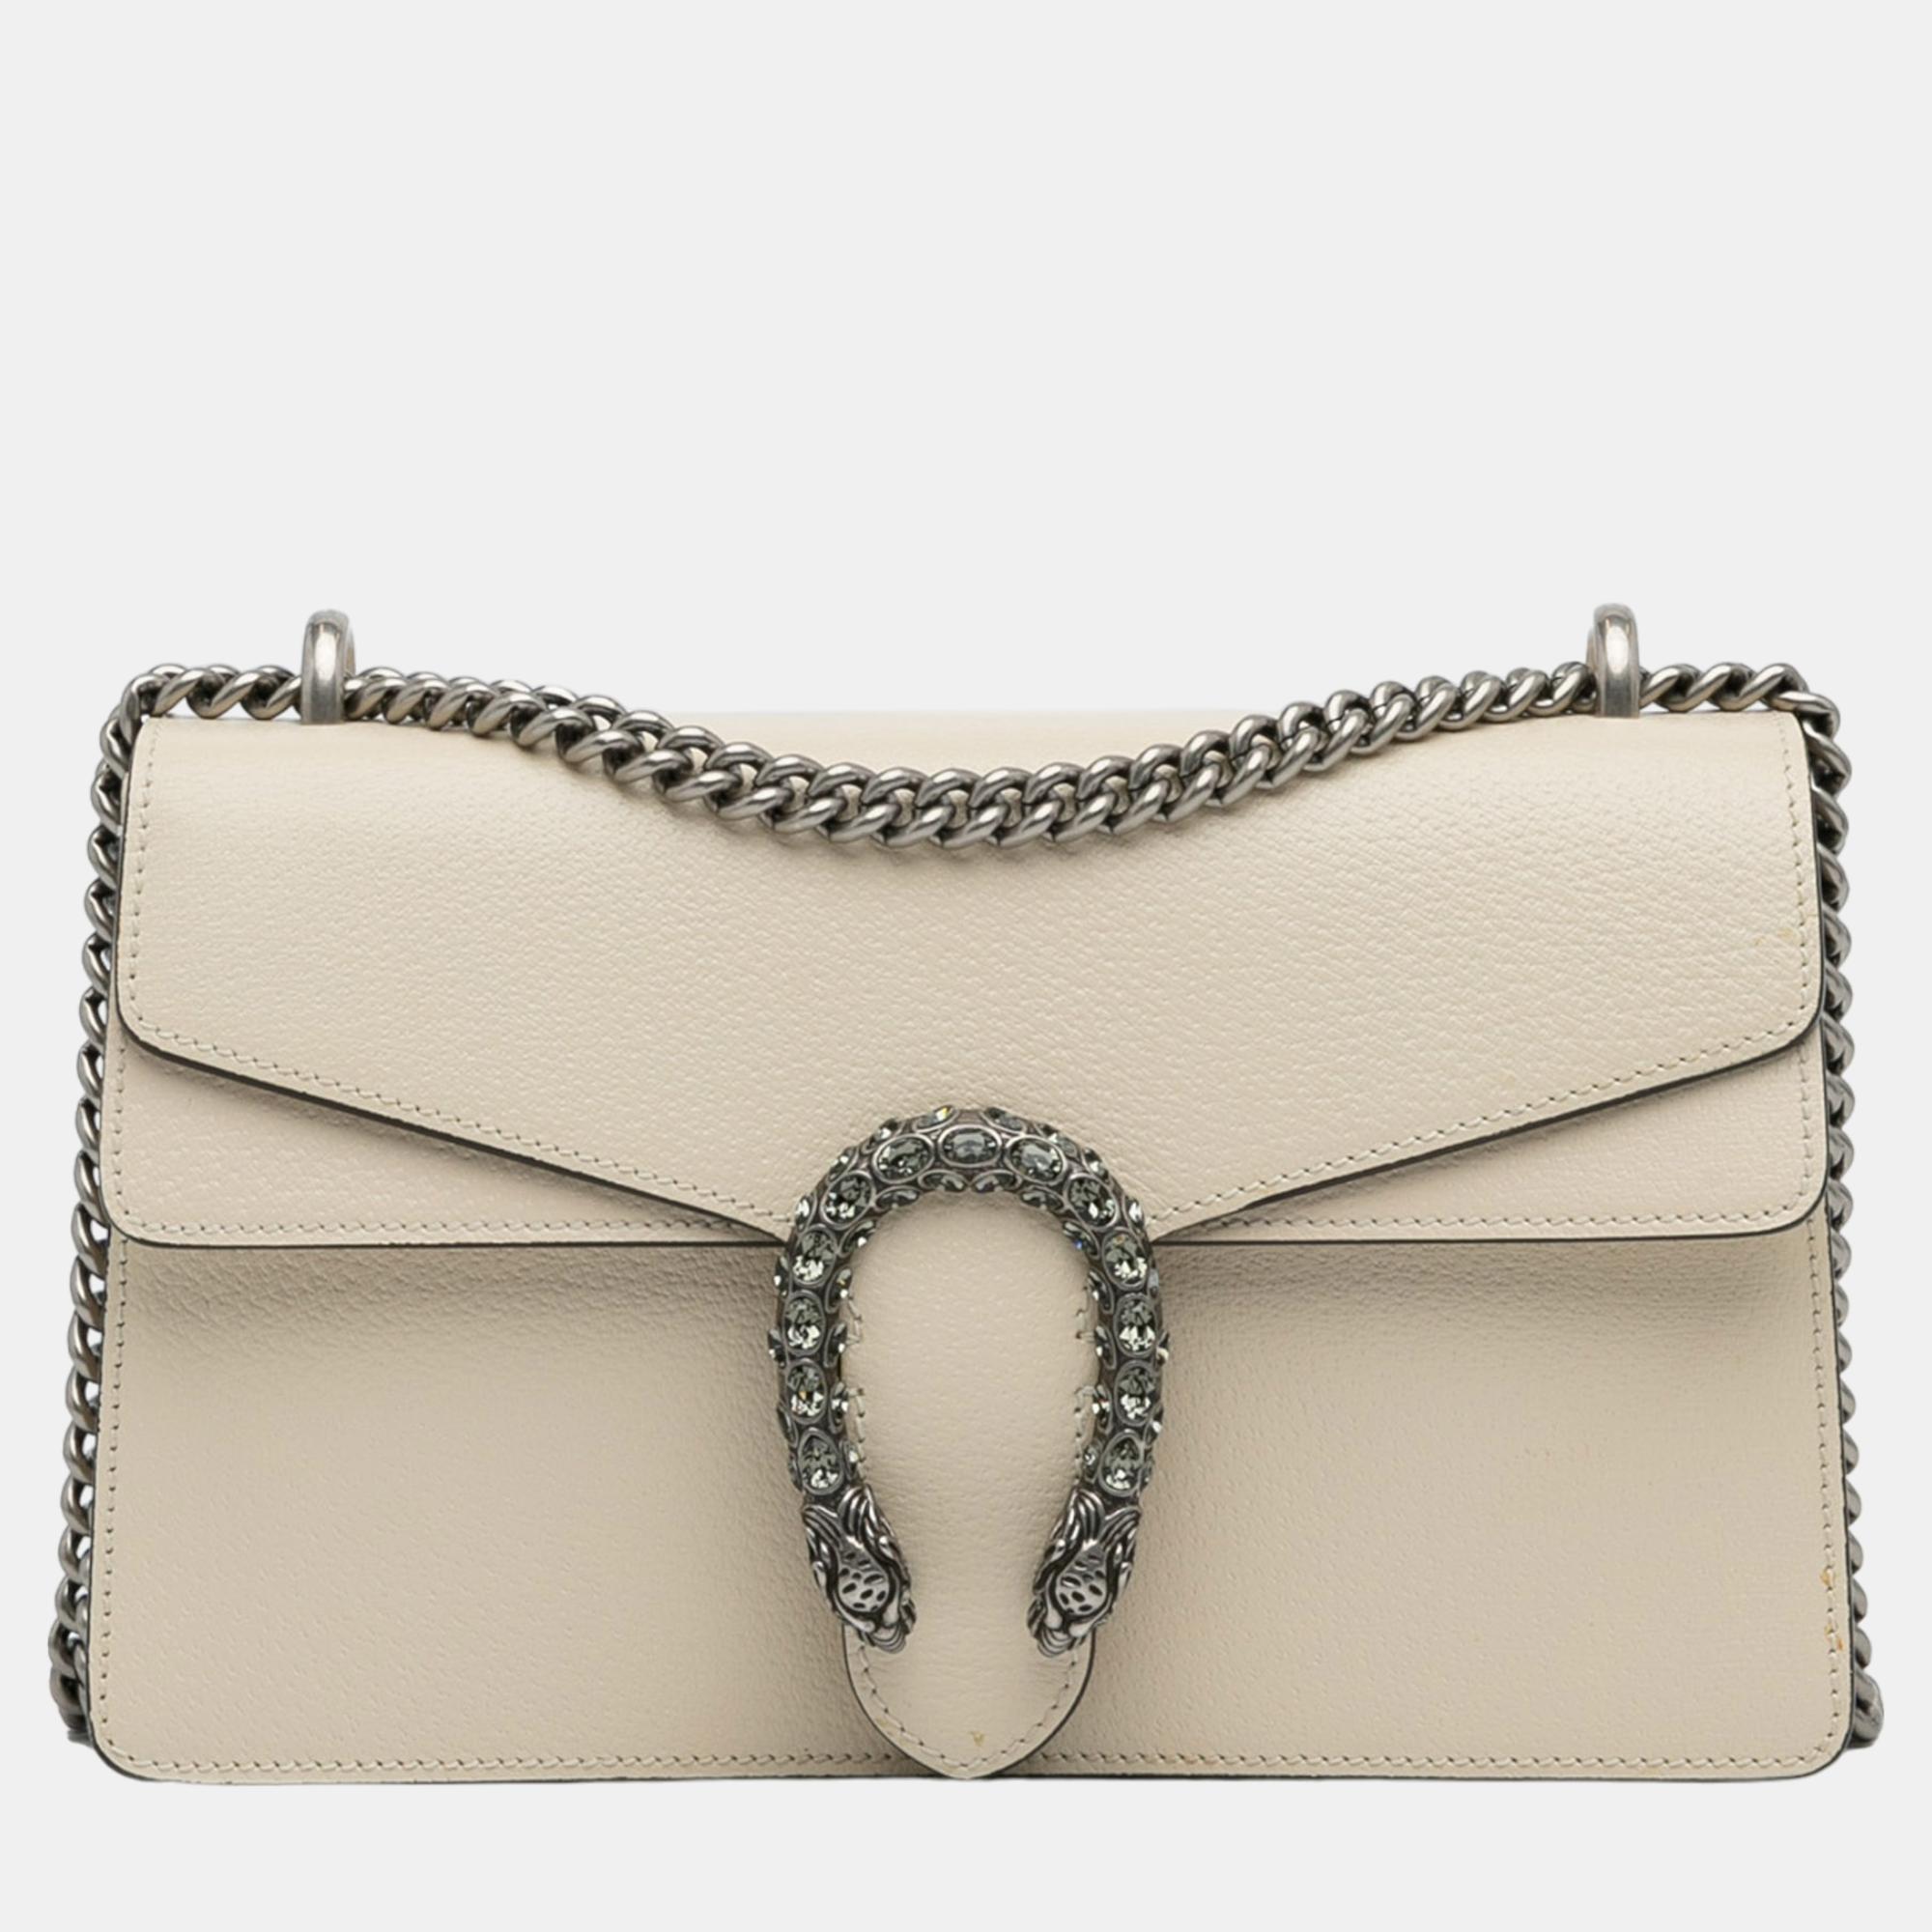 The Small Dionysus shoulder bag features a leather body a curb chain shoulder strap a flap with magnetic snap closure and an interior zip pocket.